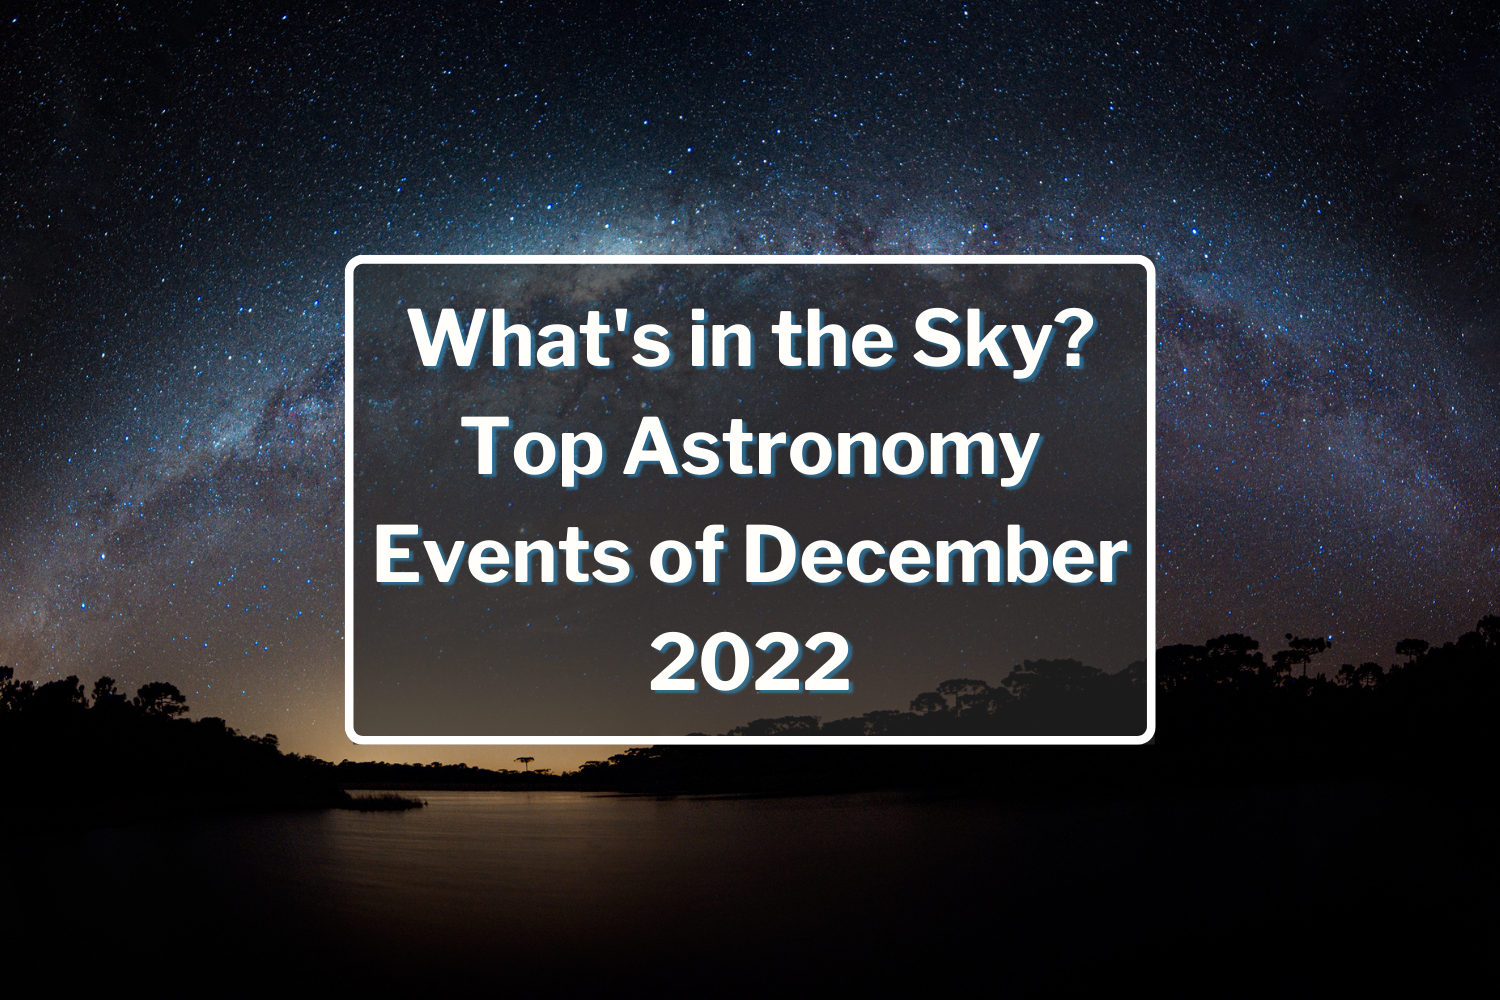 What's in the Sky? Top Astronomy Events of December 2022